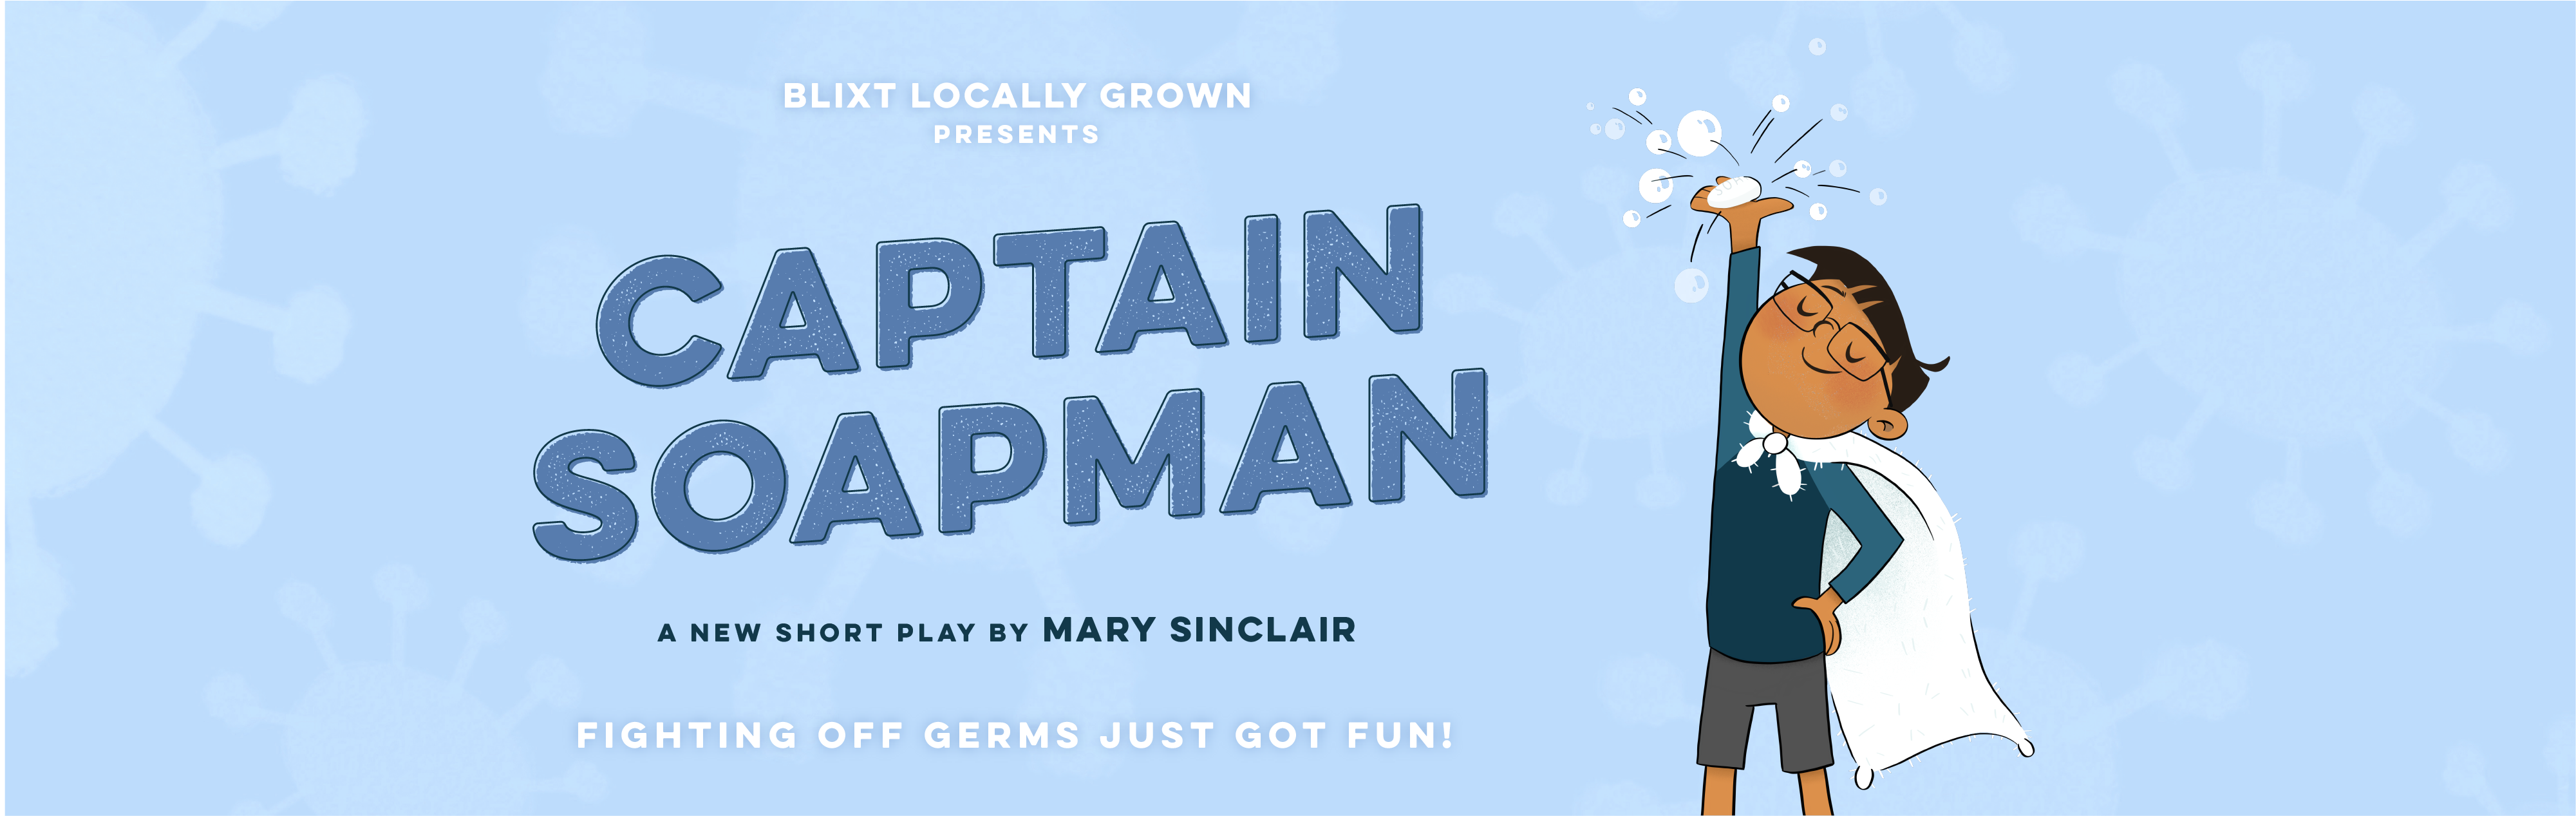 Blixt Locally Grown utilizes new play Captain Soapman to empower children during COVID-19